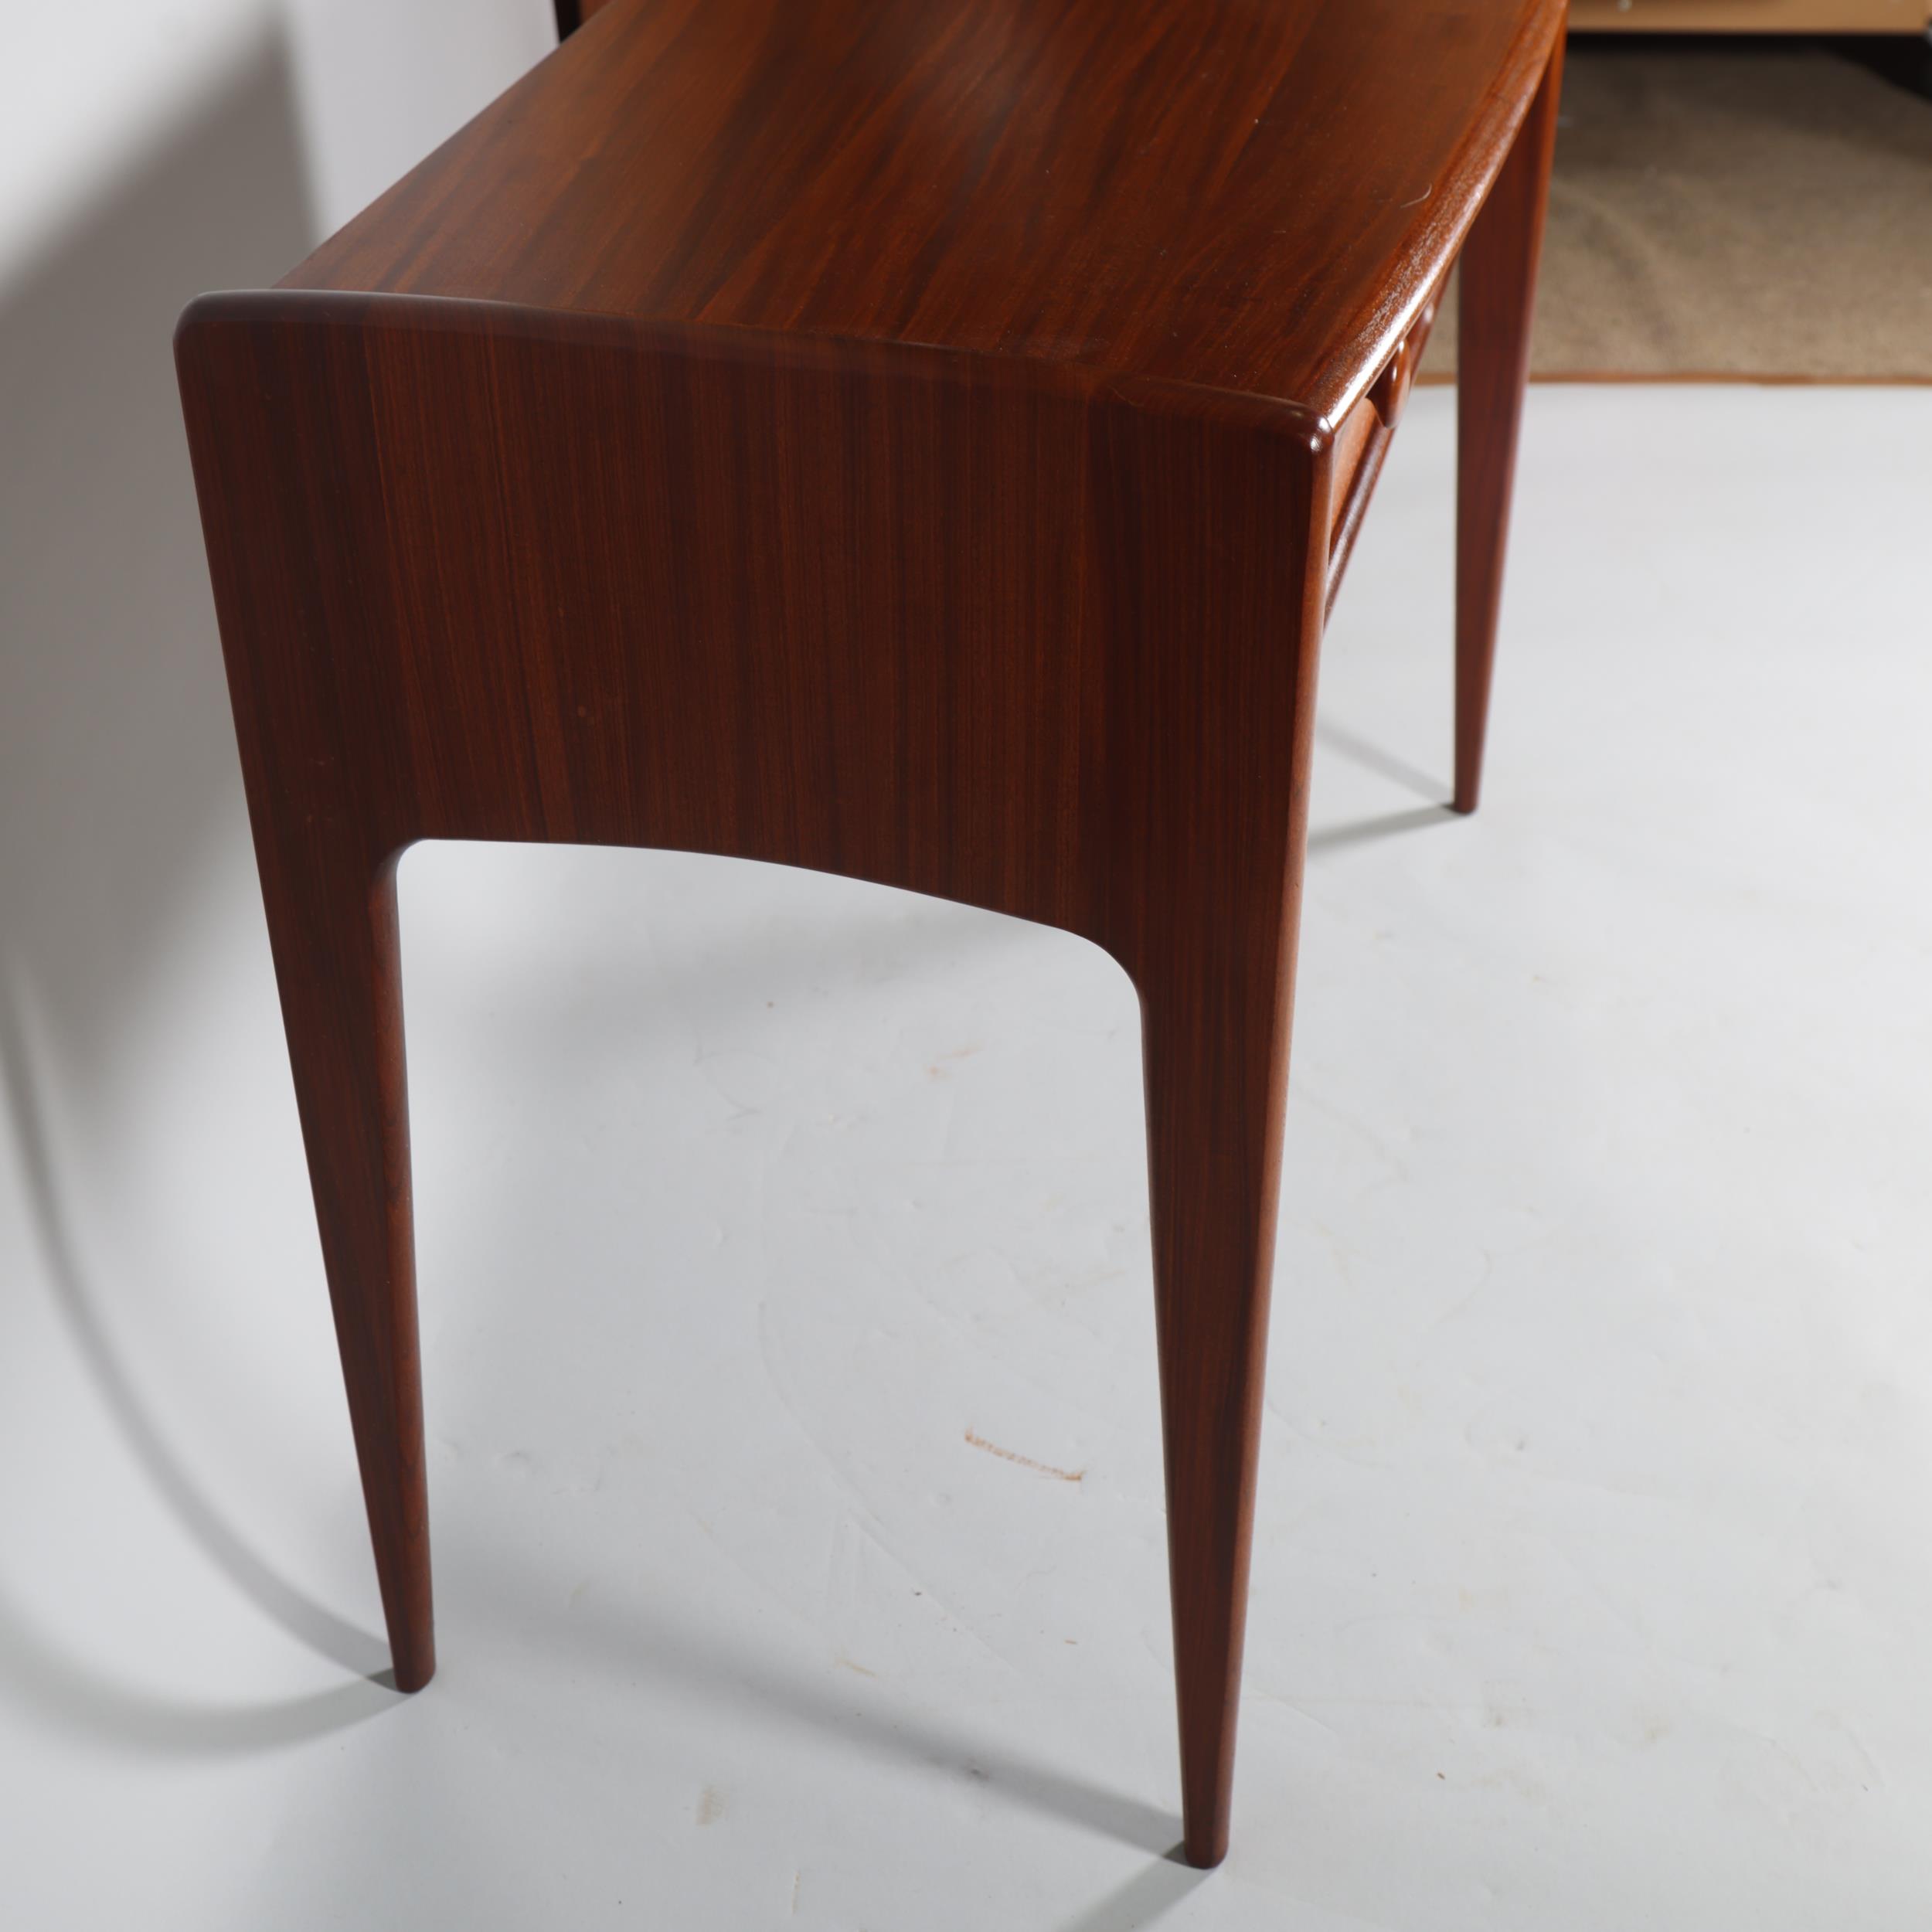 JOHN HERBERT for A Younger Ltd, a teak console table or desk with two drawers, makers label to - Image 5 of 6